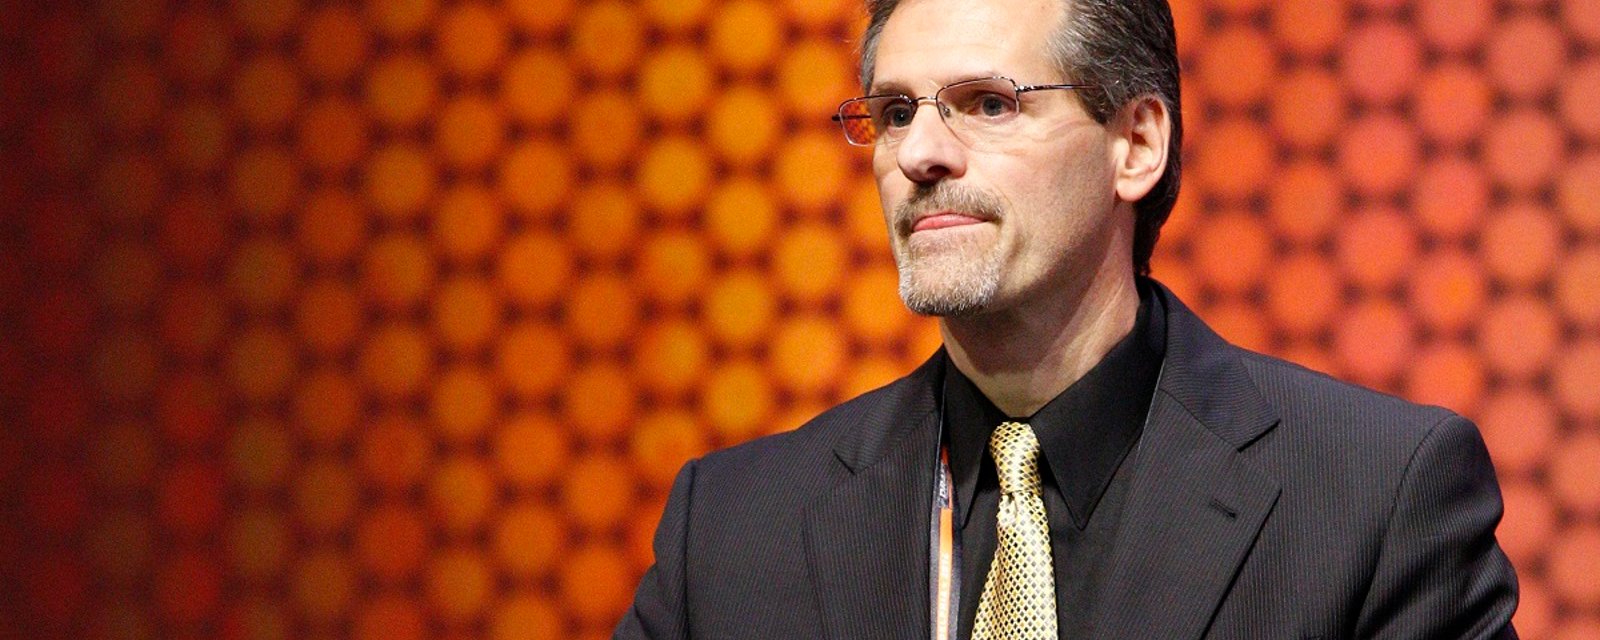 Hextall calls NHL decision “Most asinine thing I've ever seen.”